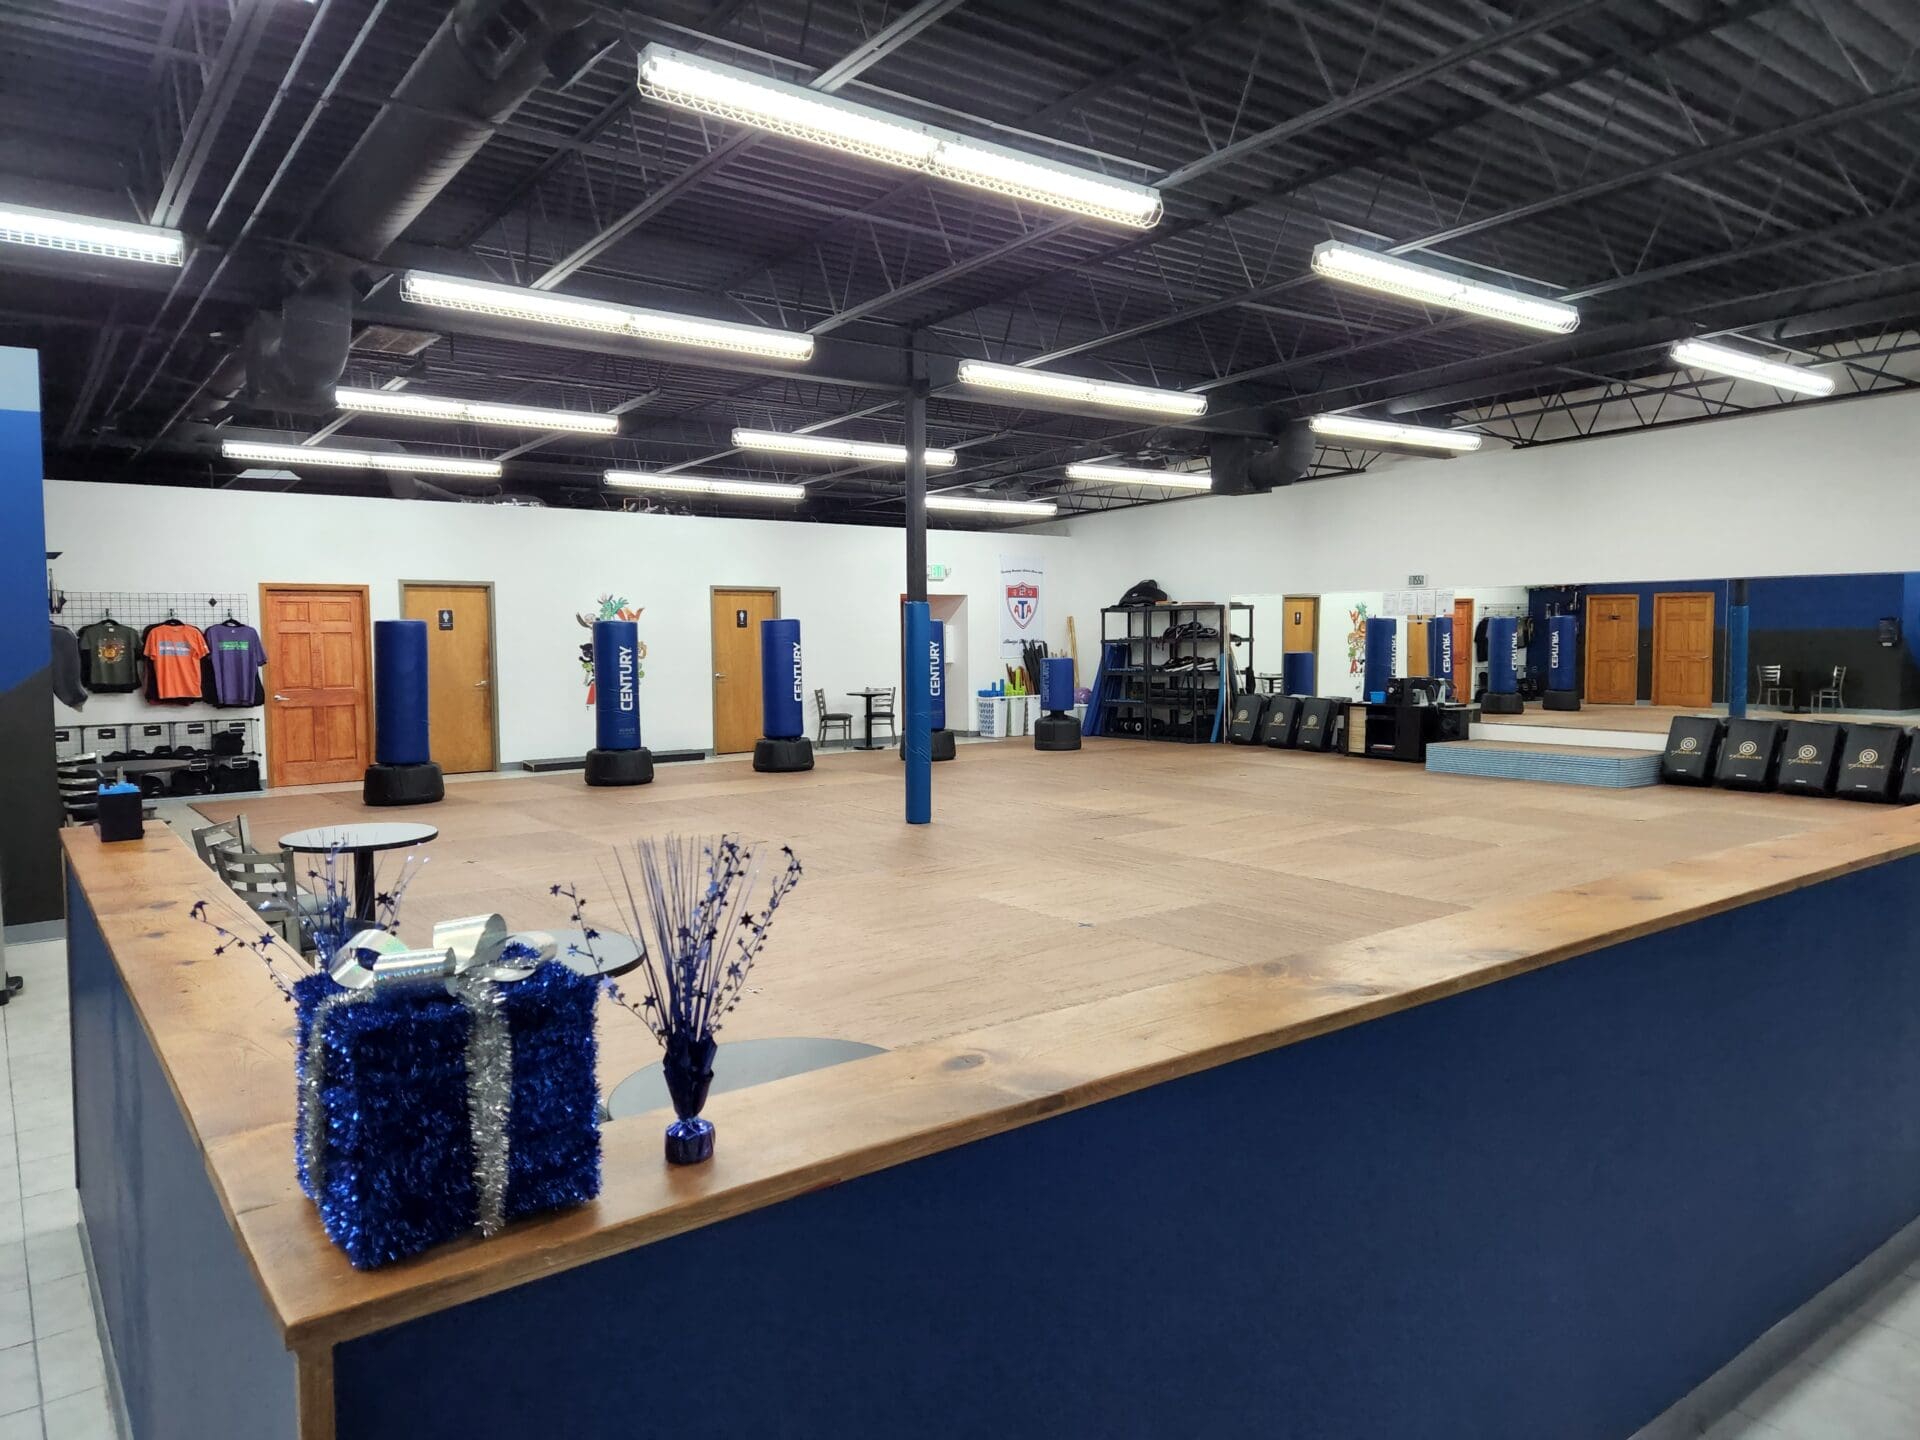 A room with many blue and white vases on the floor.